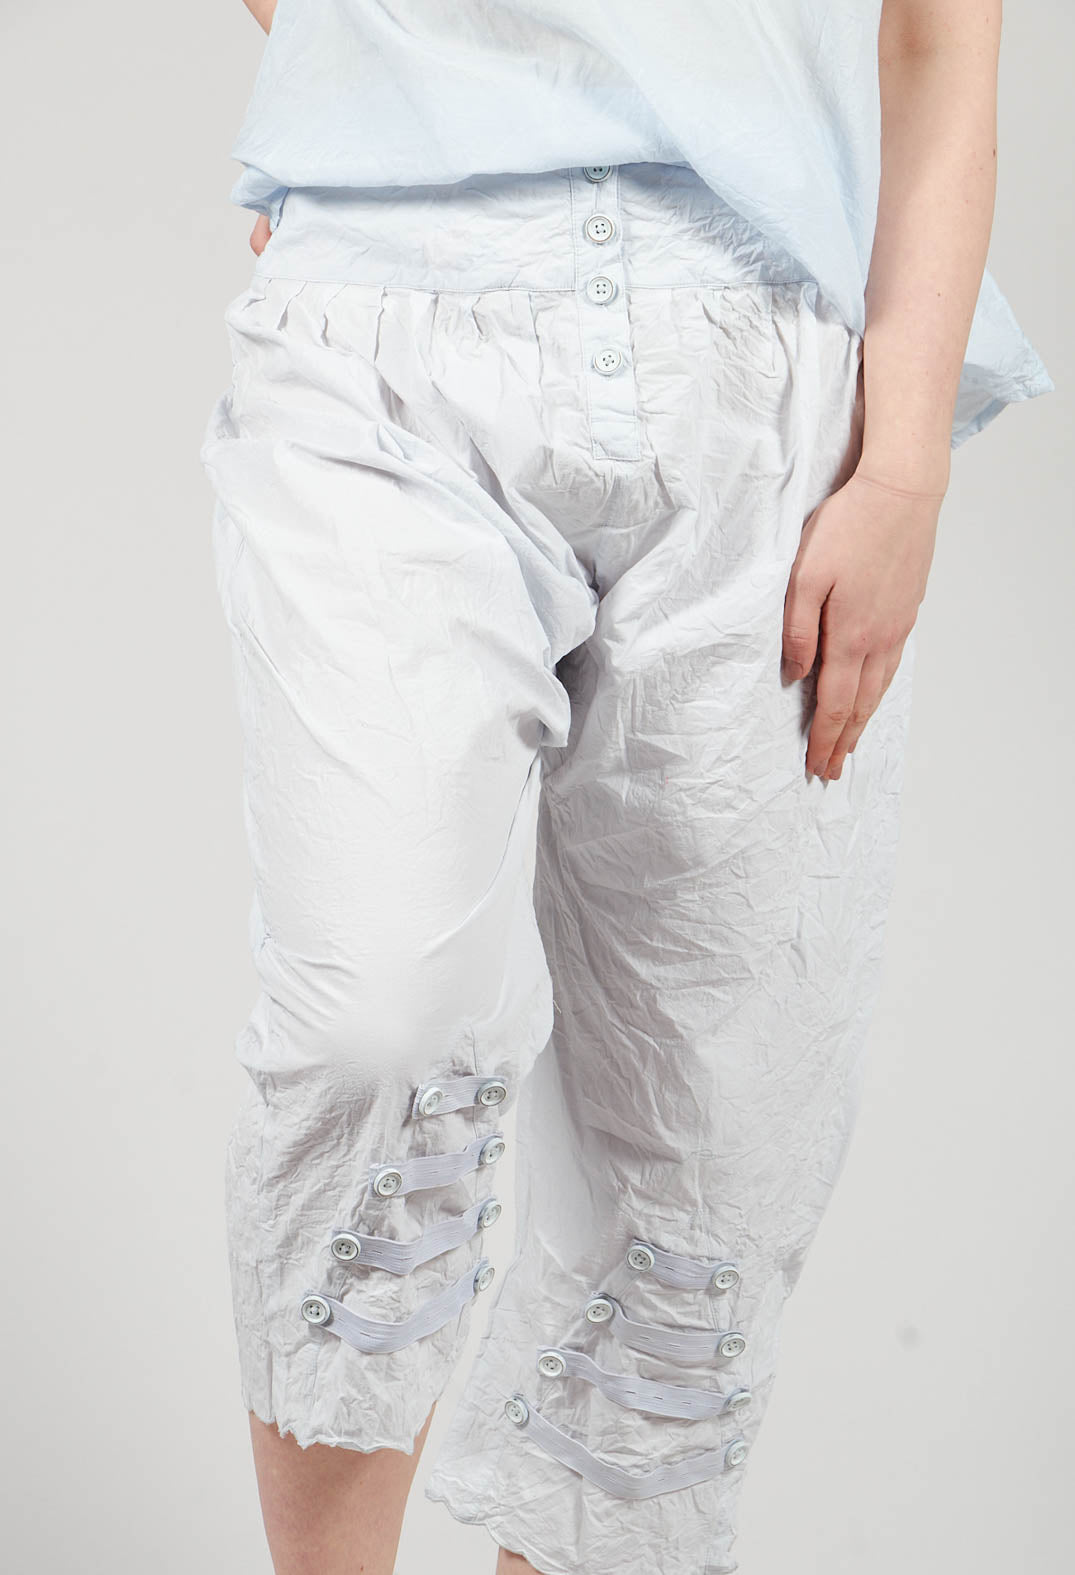 Asta Trousers in Ice Blue